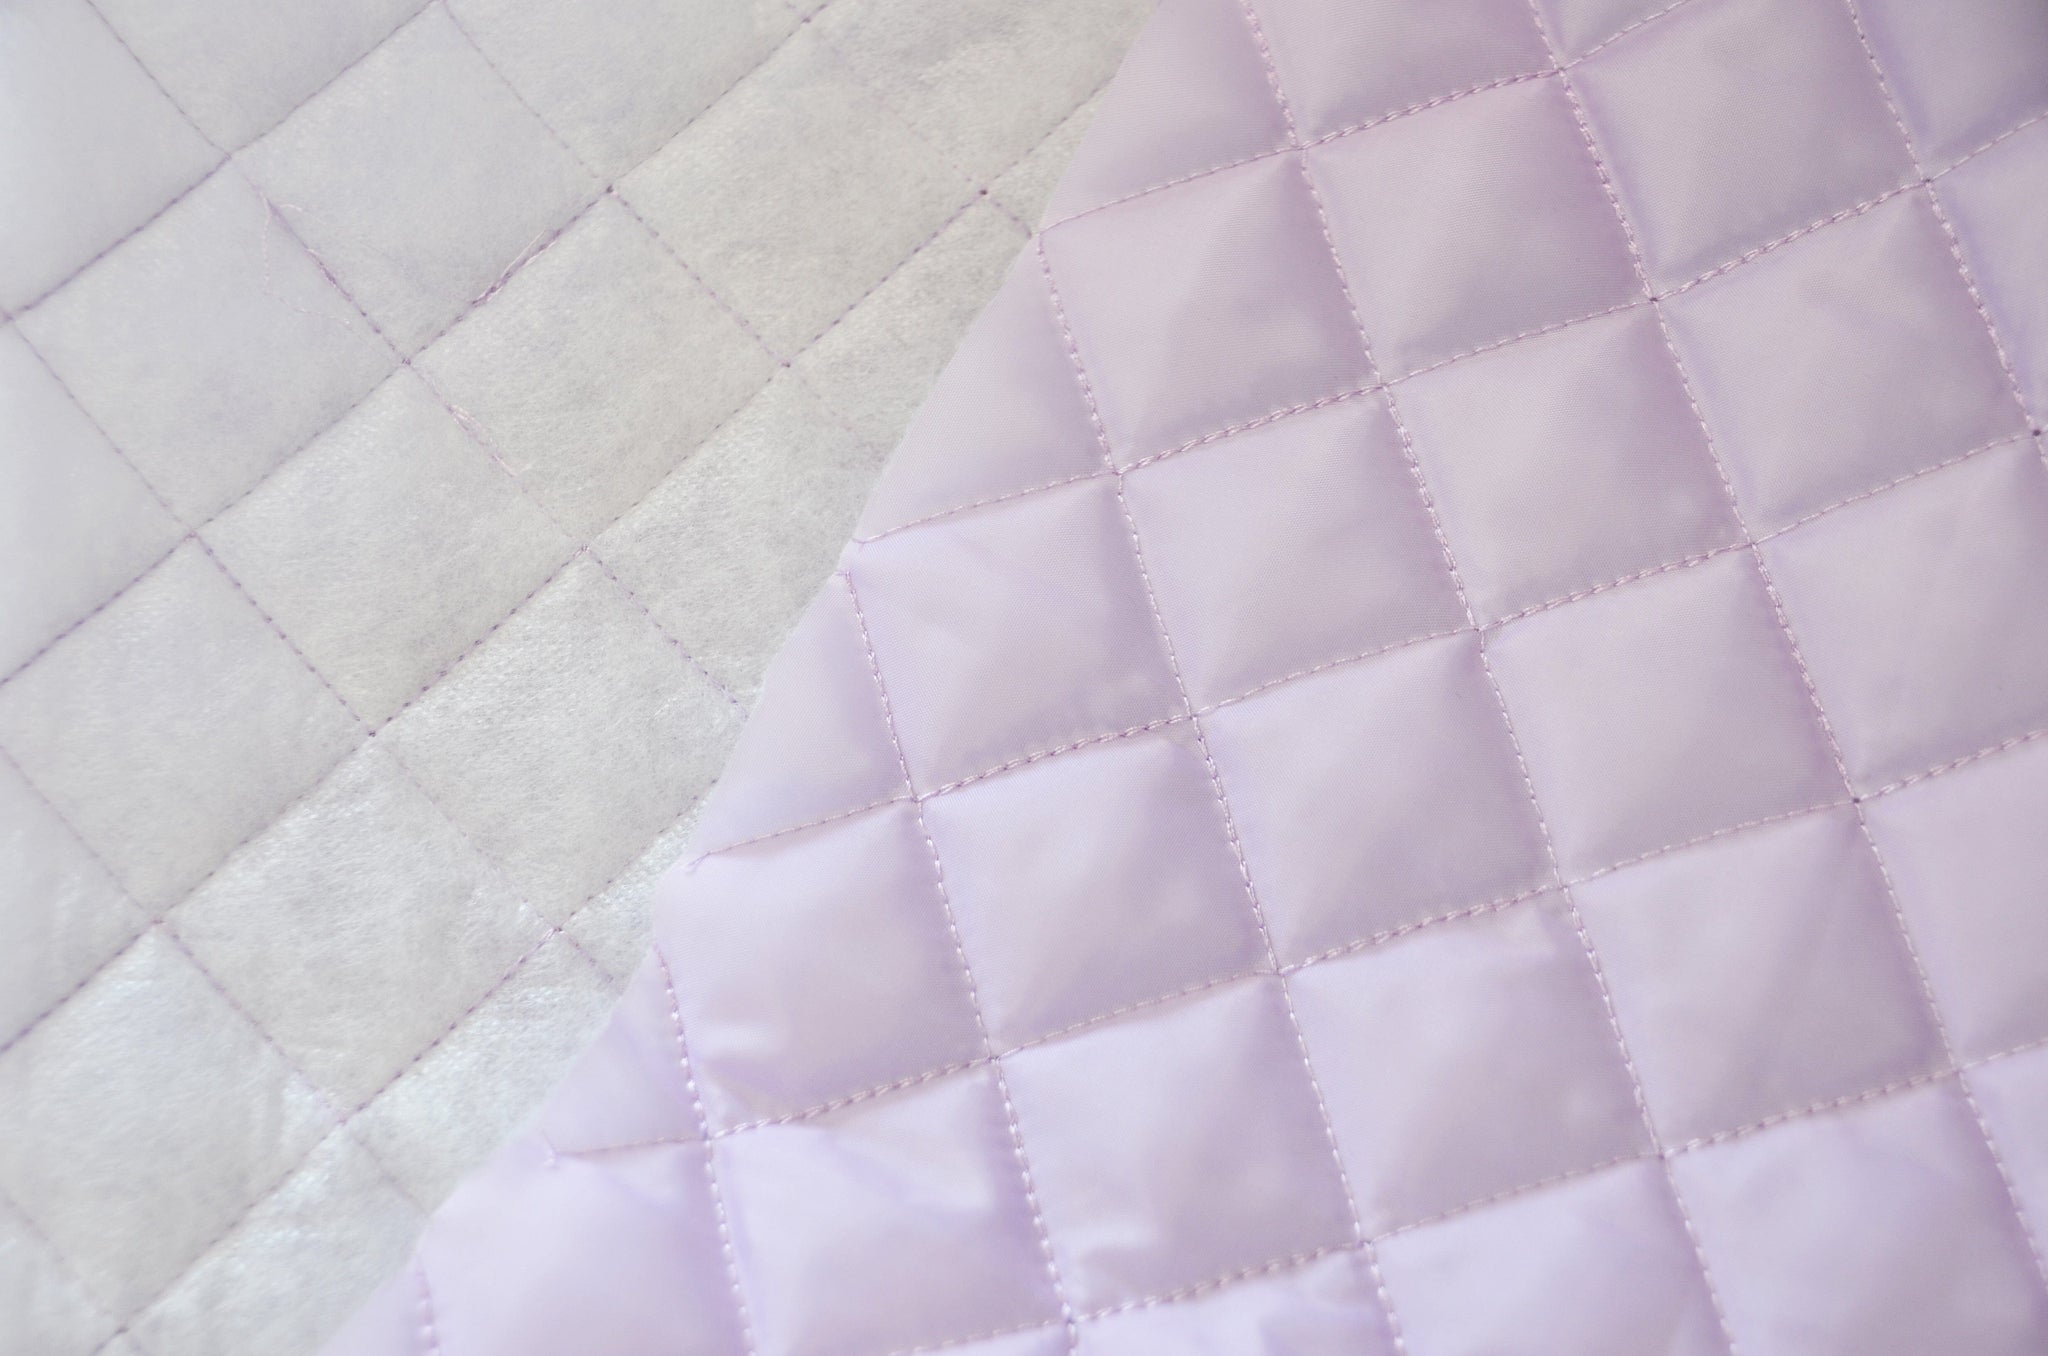 Juki Polyester Quilted Padded Lining Fabric White